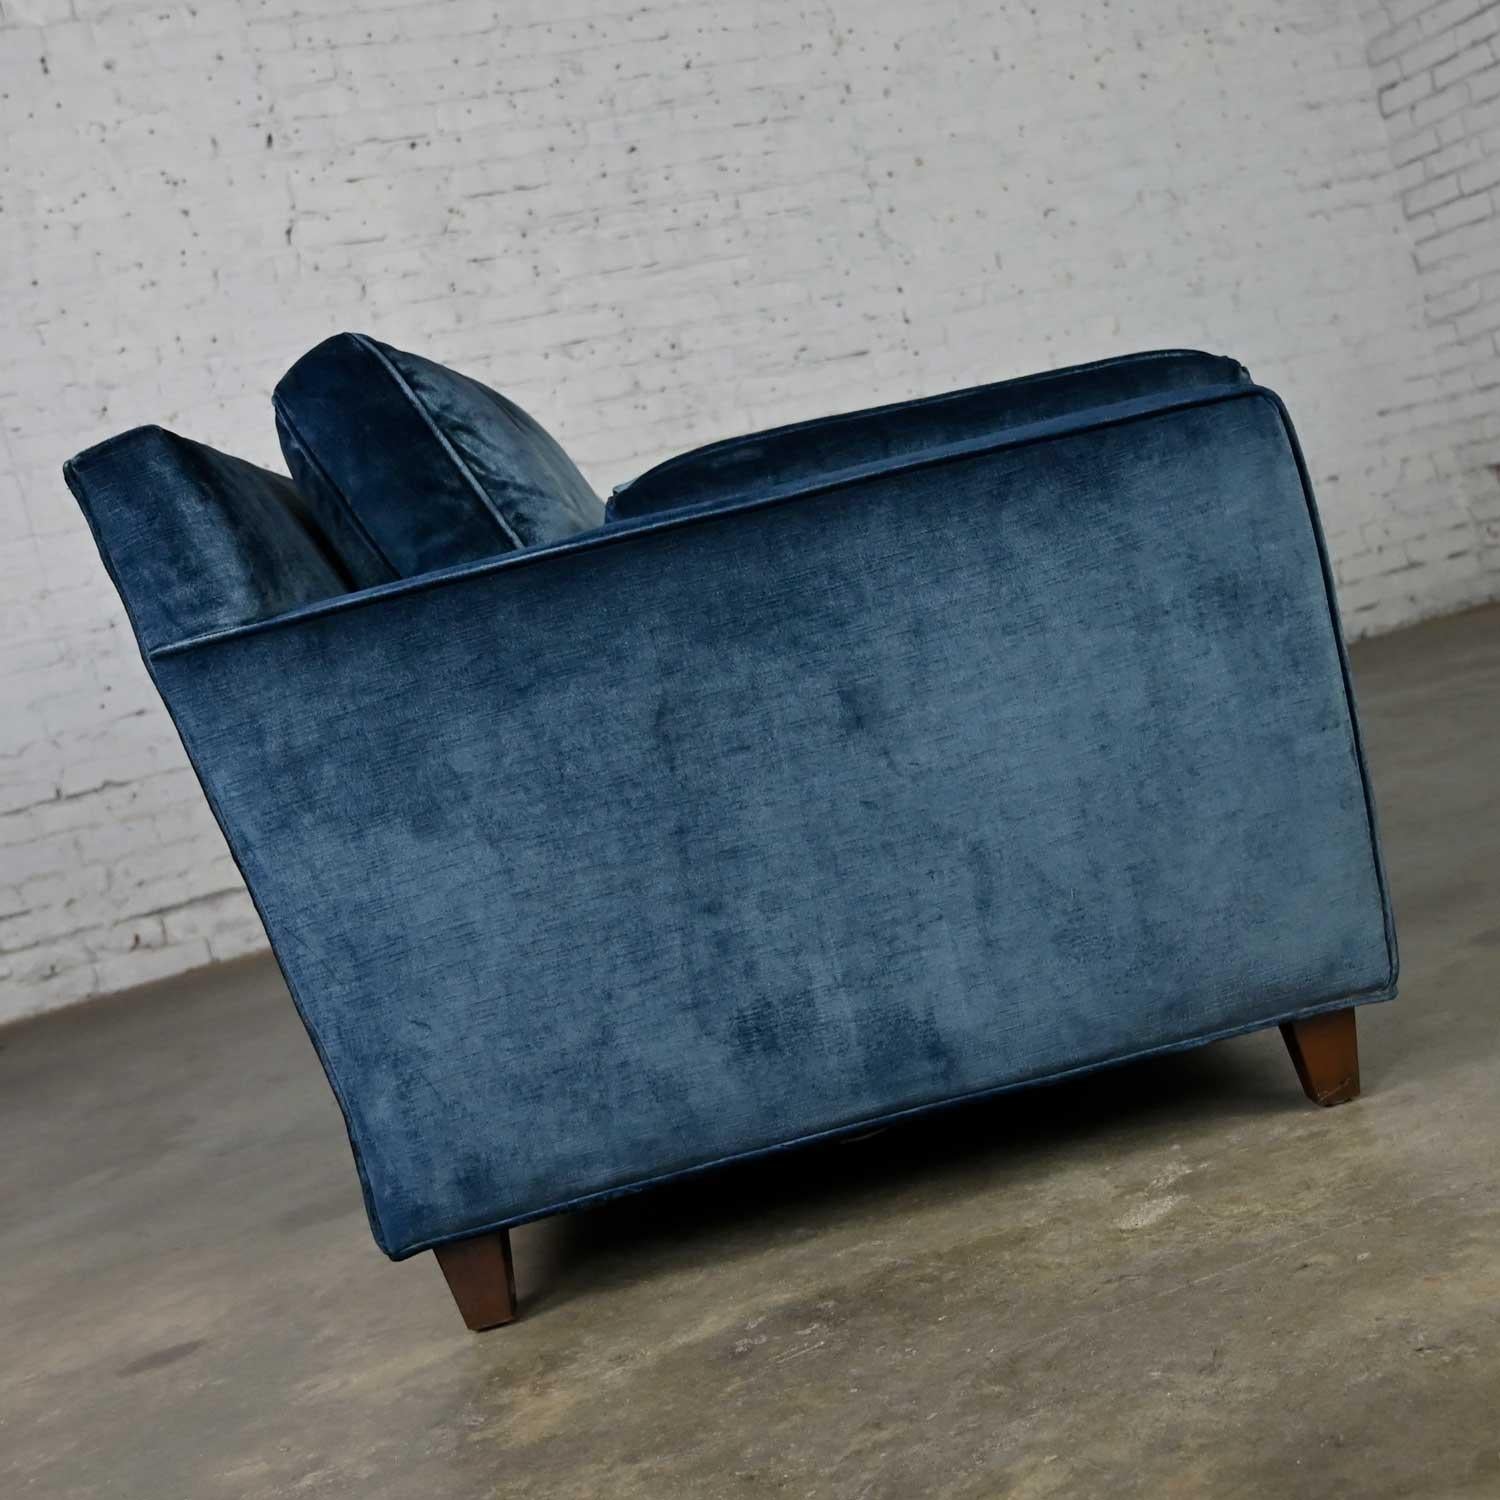 Vintage Baker Lawson Style Low Profile Sofa in Bellagio Cobalt Fabric by Fabricu 2